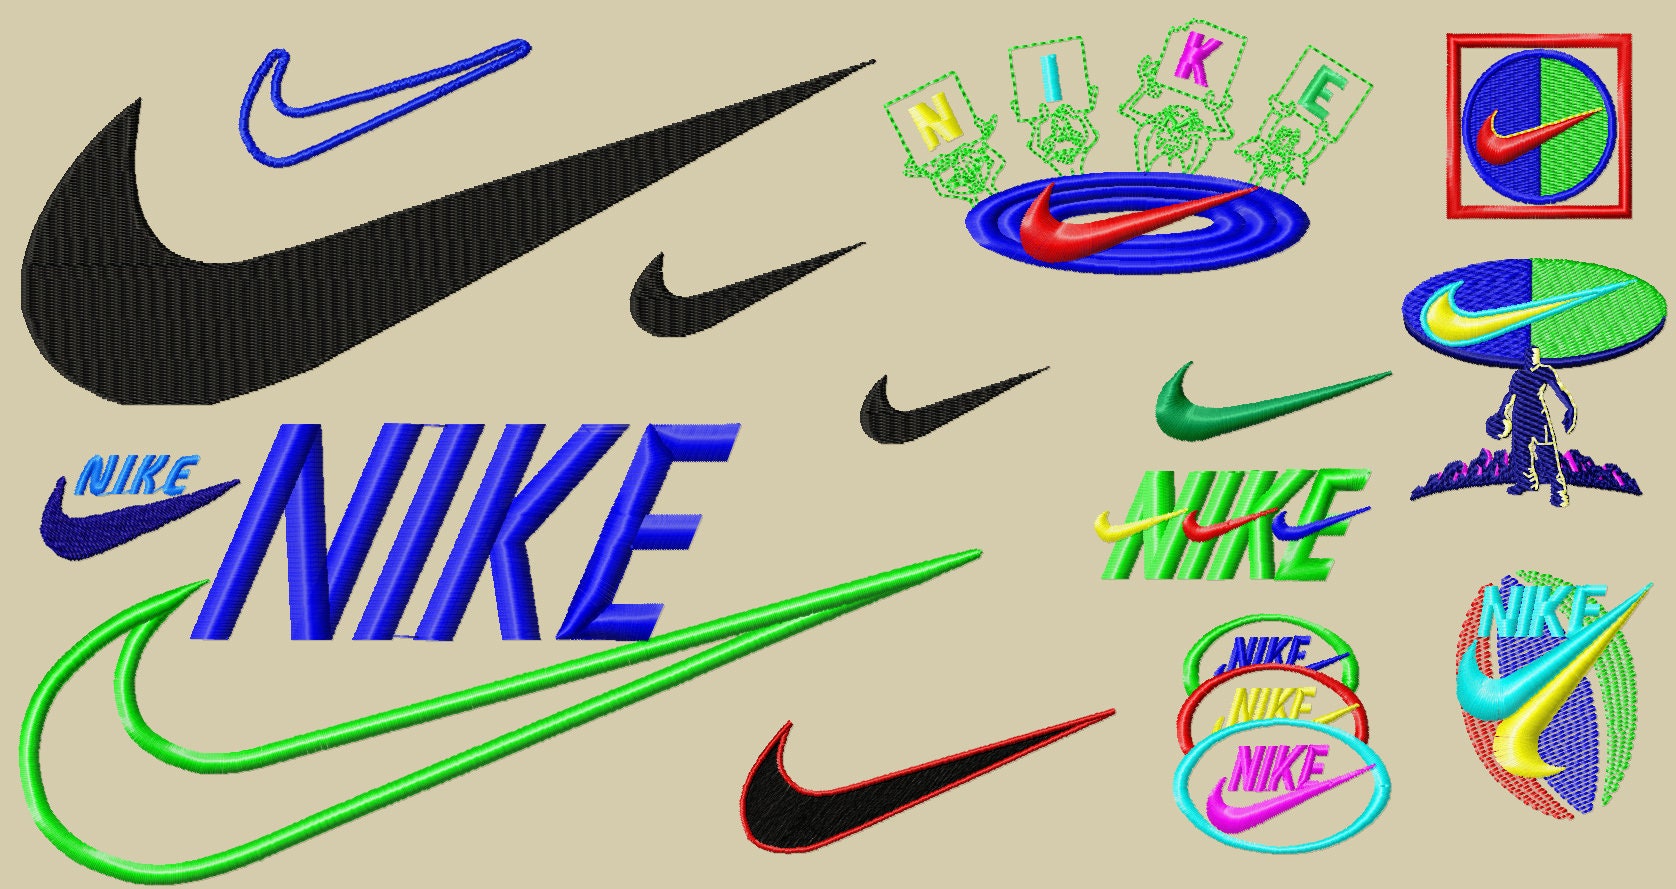 NIKE Embroidery Designs Nike Fashion Logos Embroidery Over | Etsy